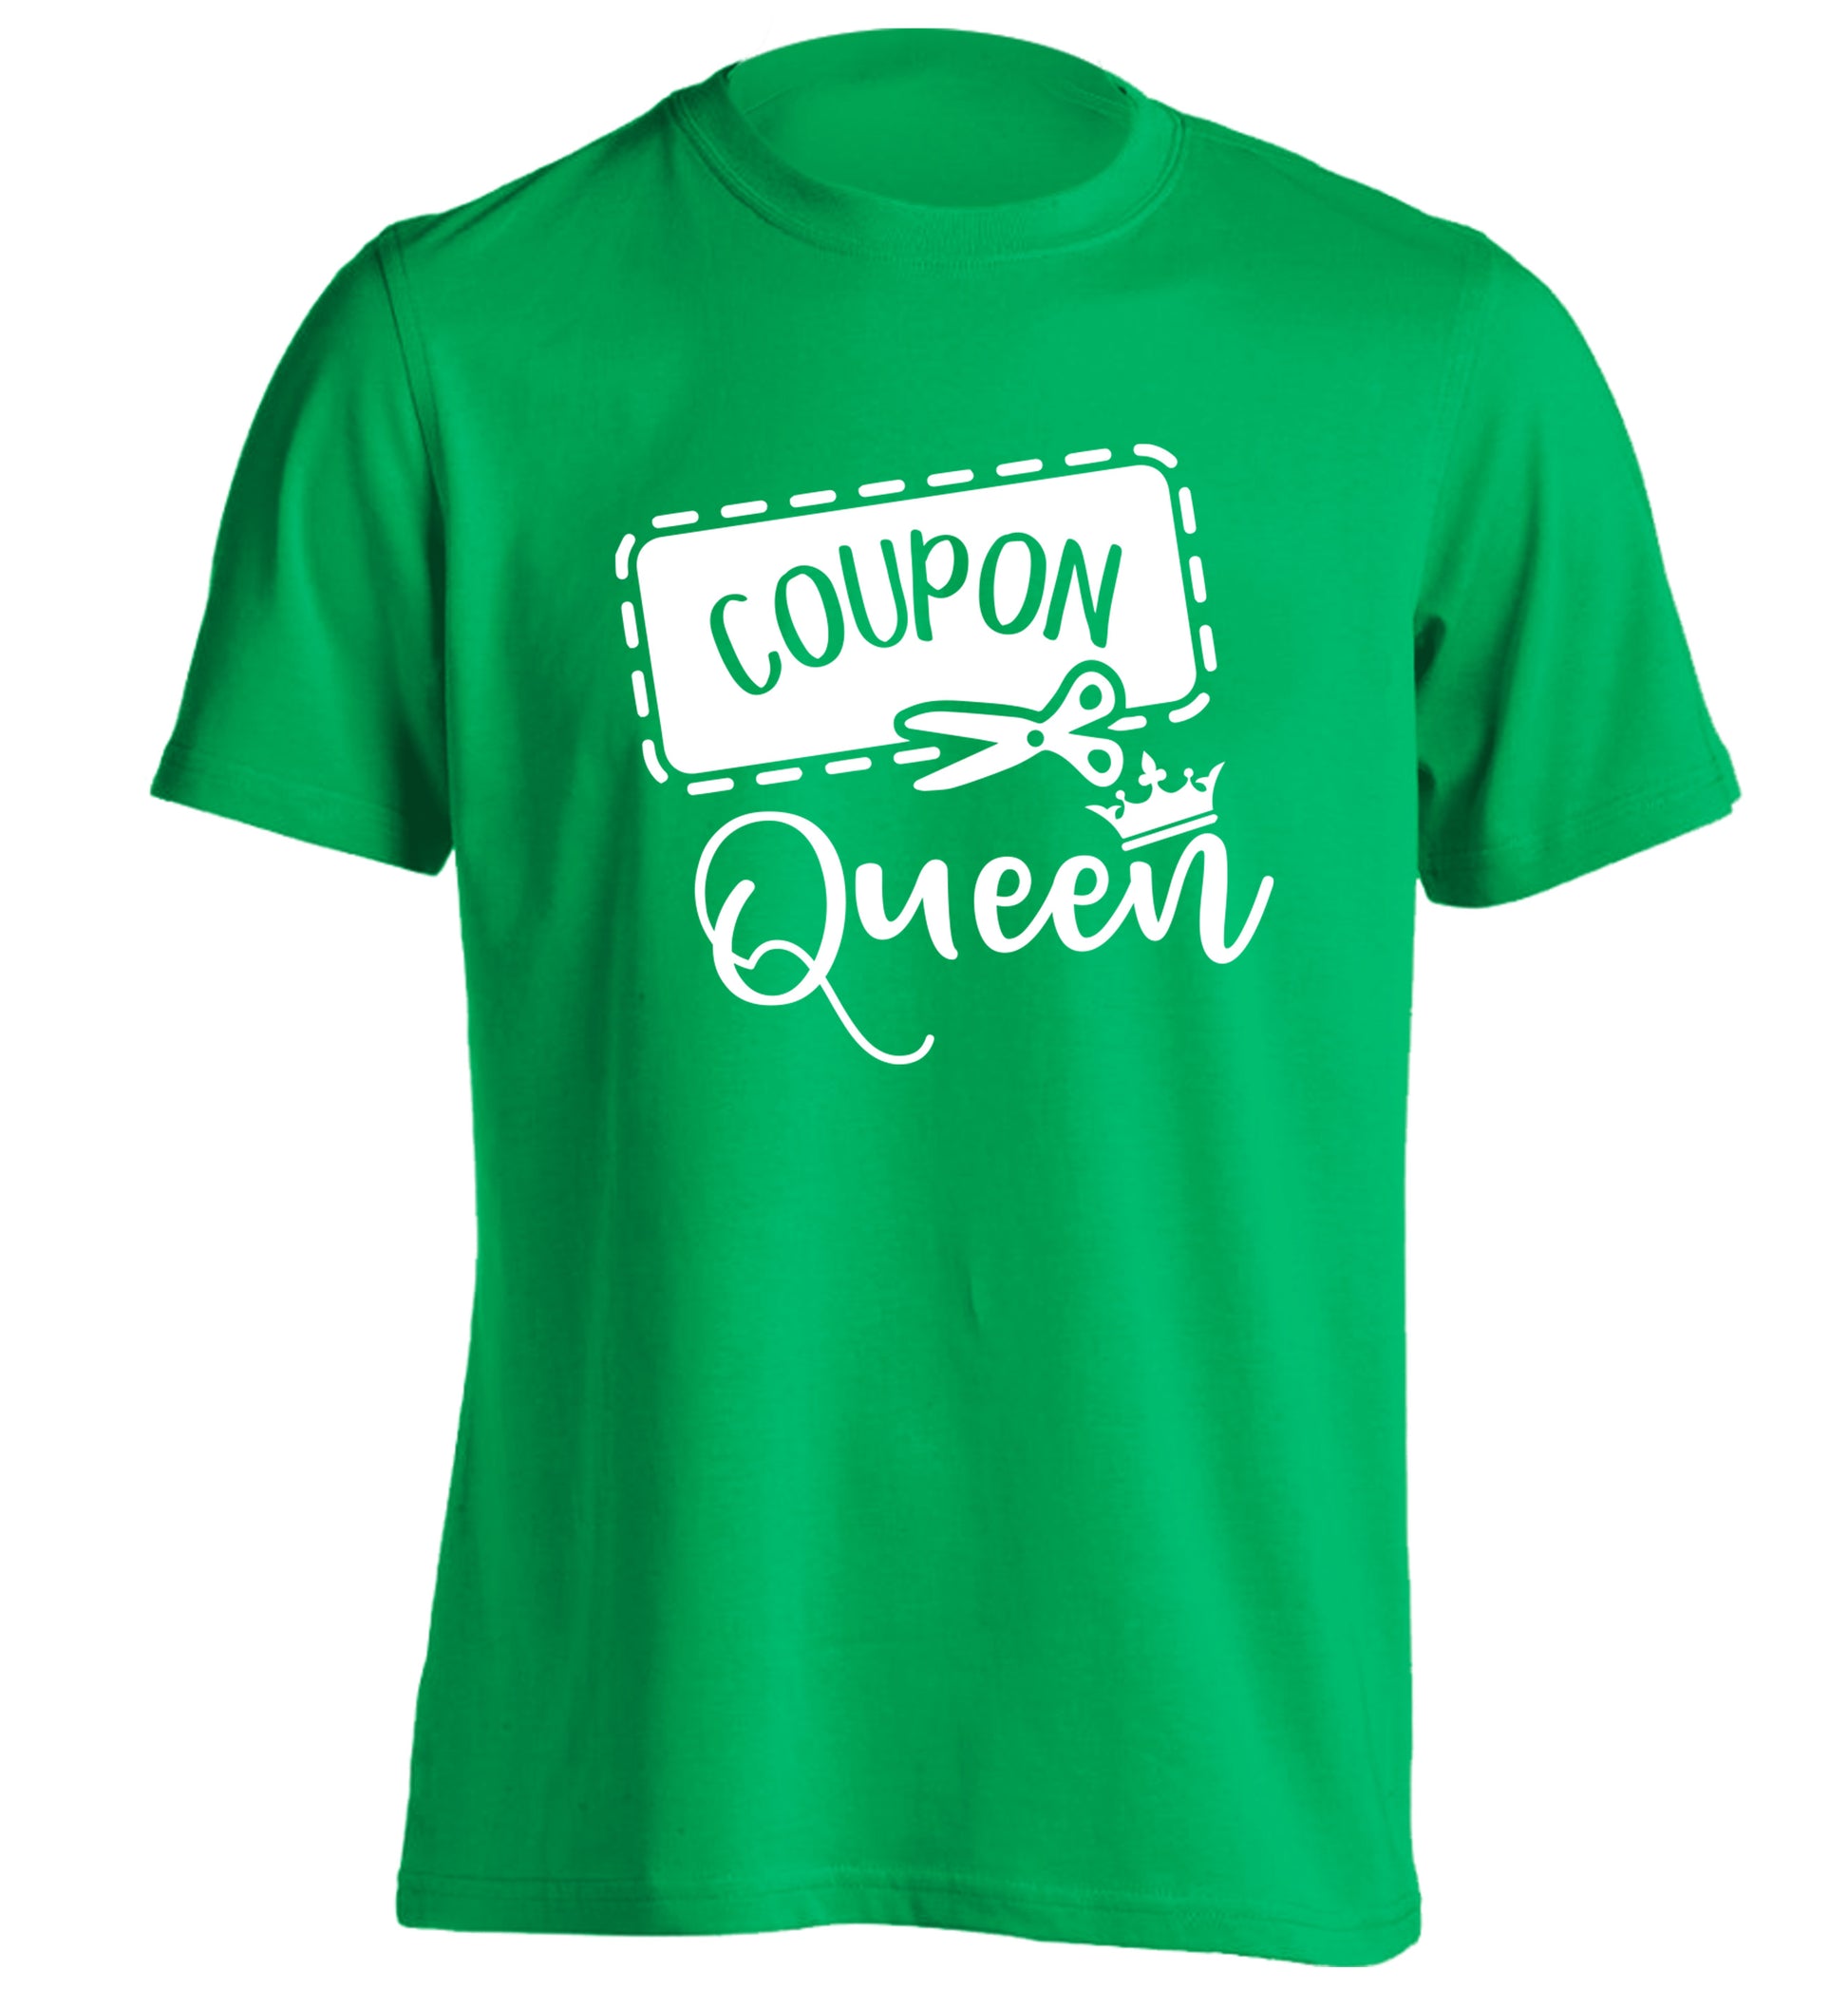 Coupon Queen adults unisex green Tshirt 2XL